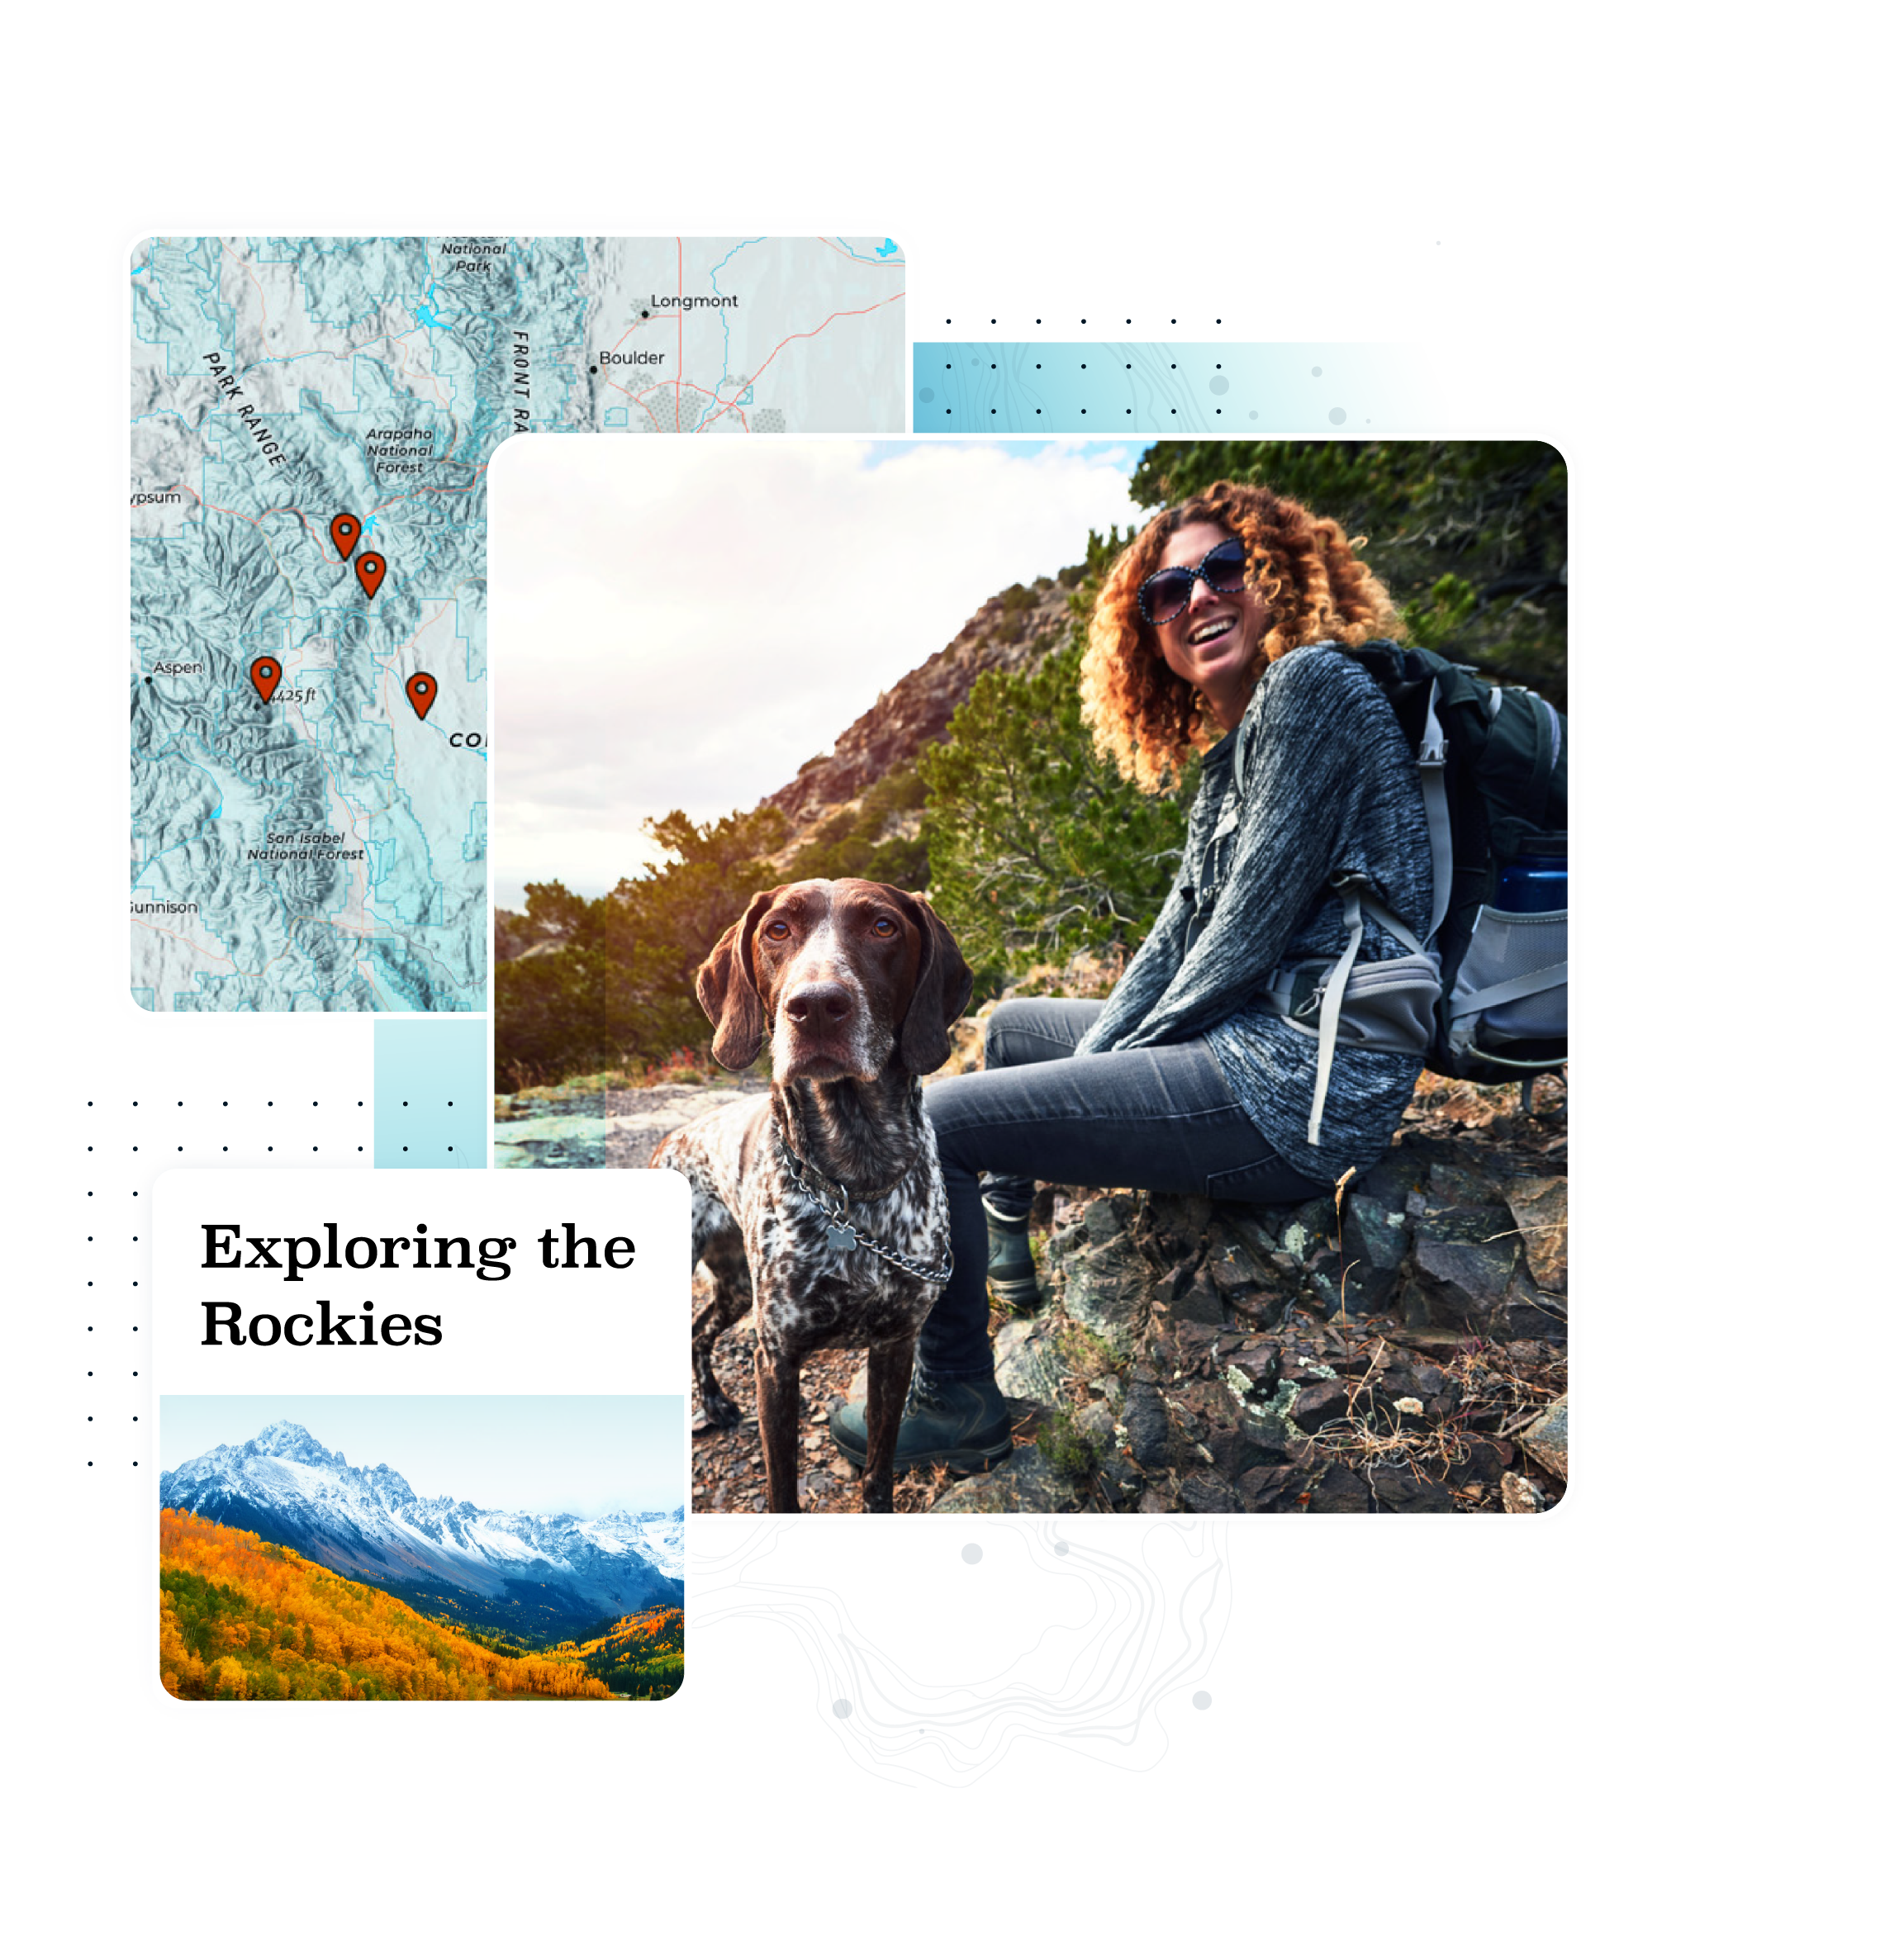 A Colorado map, a woman with a backpack smiles on a rock with her dog, and mountains with “Exploring the Rockies” text.